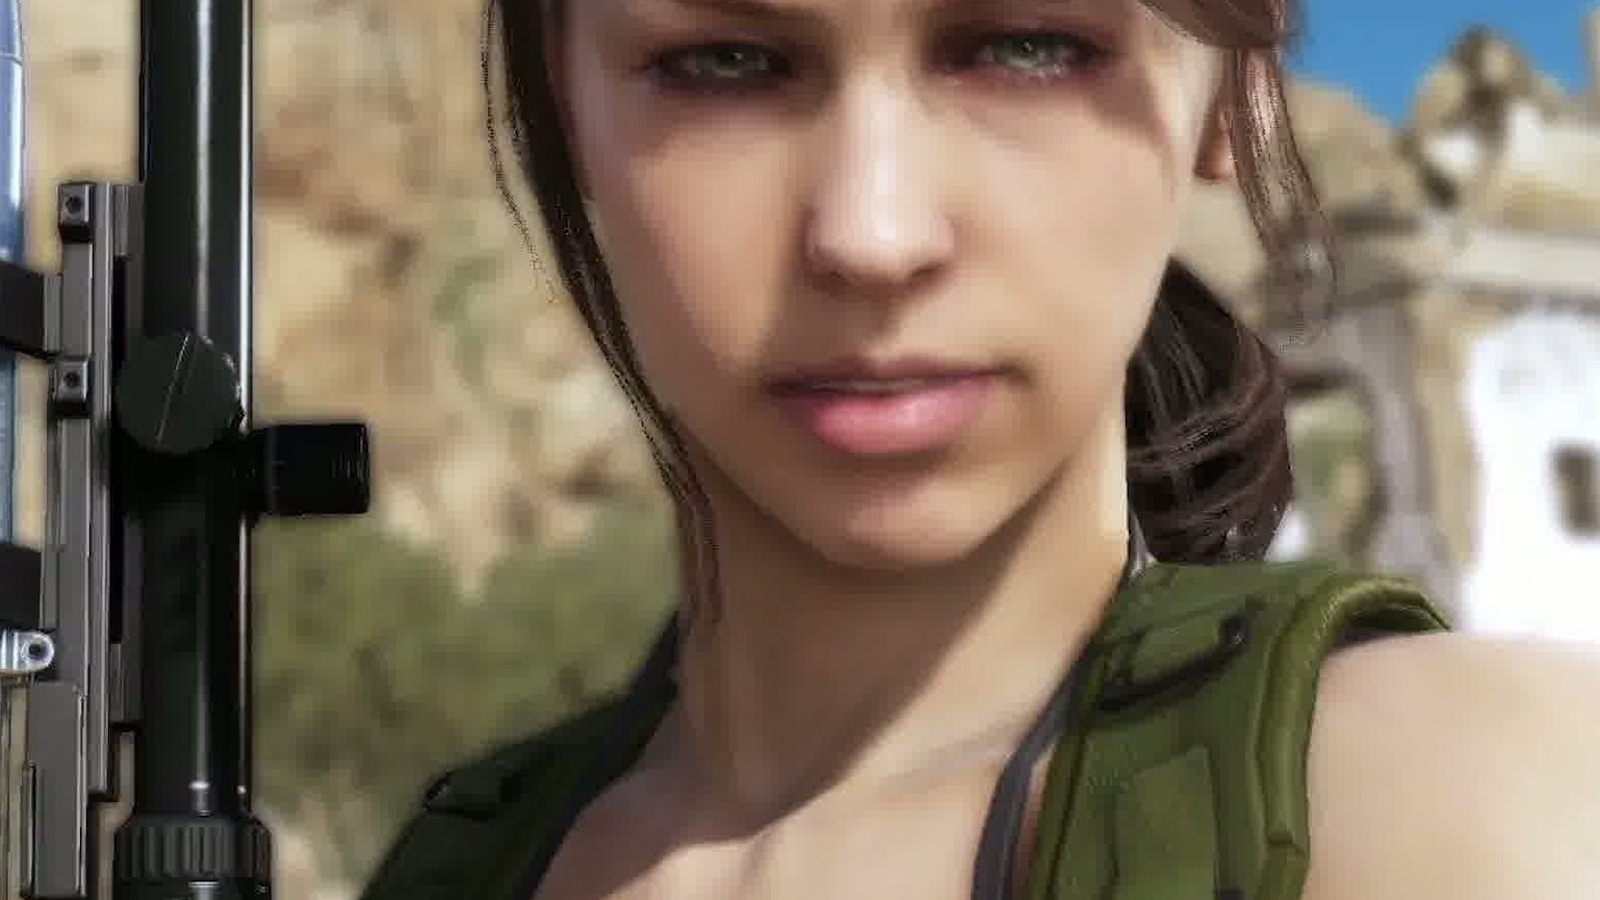 Metal Gear Solid 5: The Phantom Pain Snake and Quiet gameplay revealed